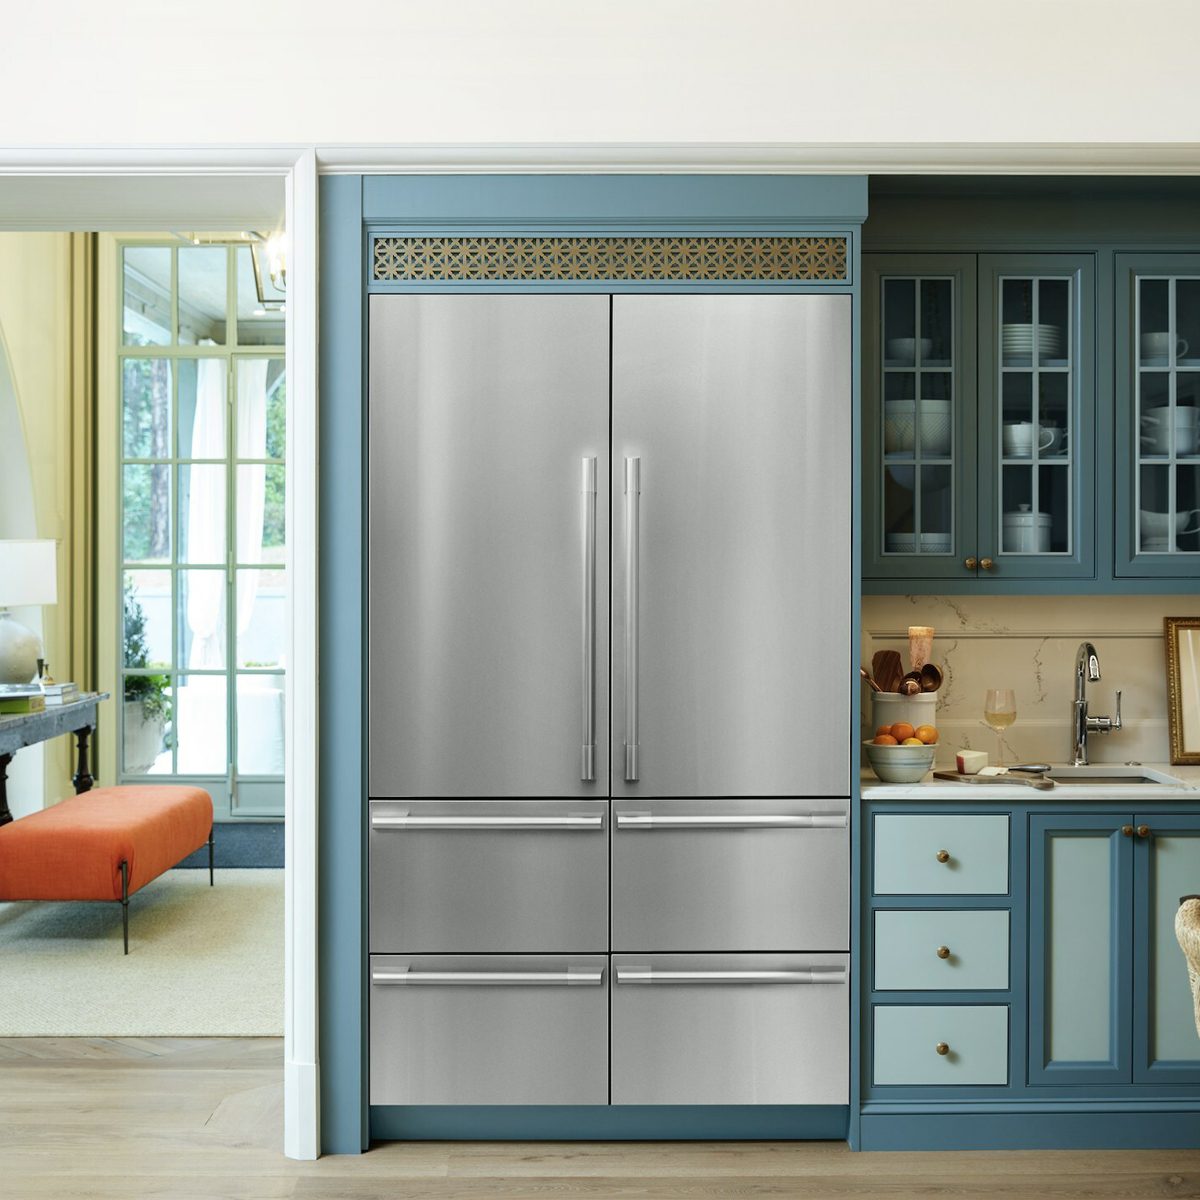 Signature Kitchen Suite's First Of Its Kind 48 Inch Built In French Door Refrigerator Prnewswire.com